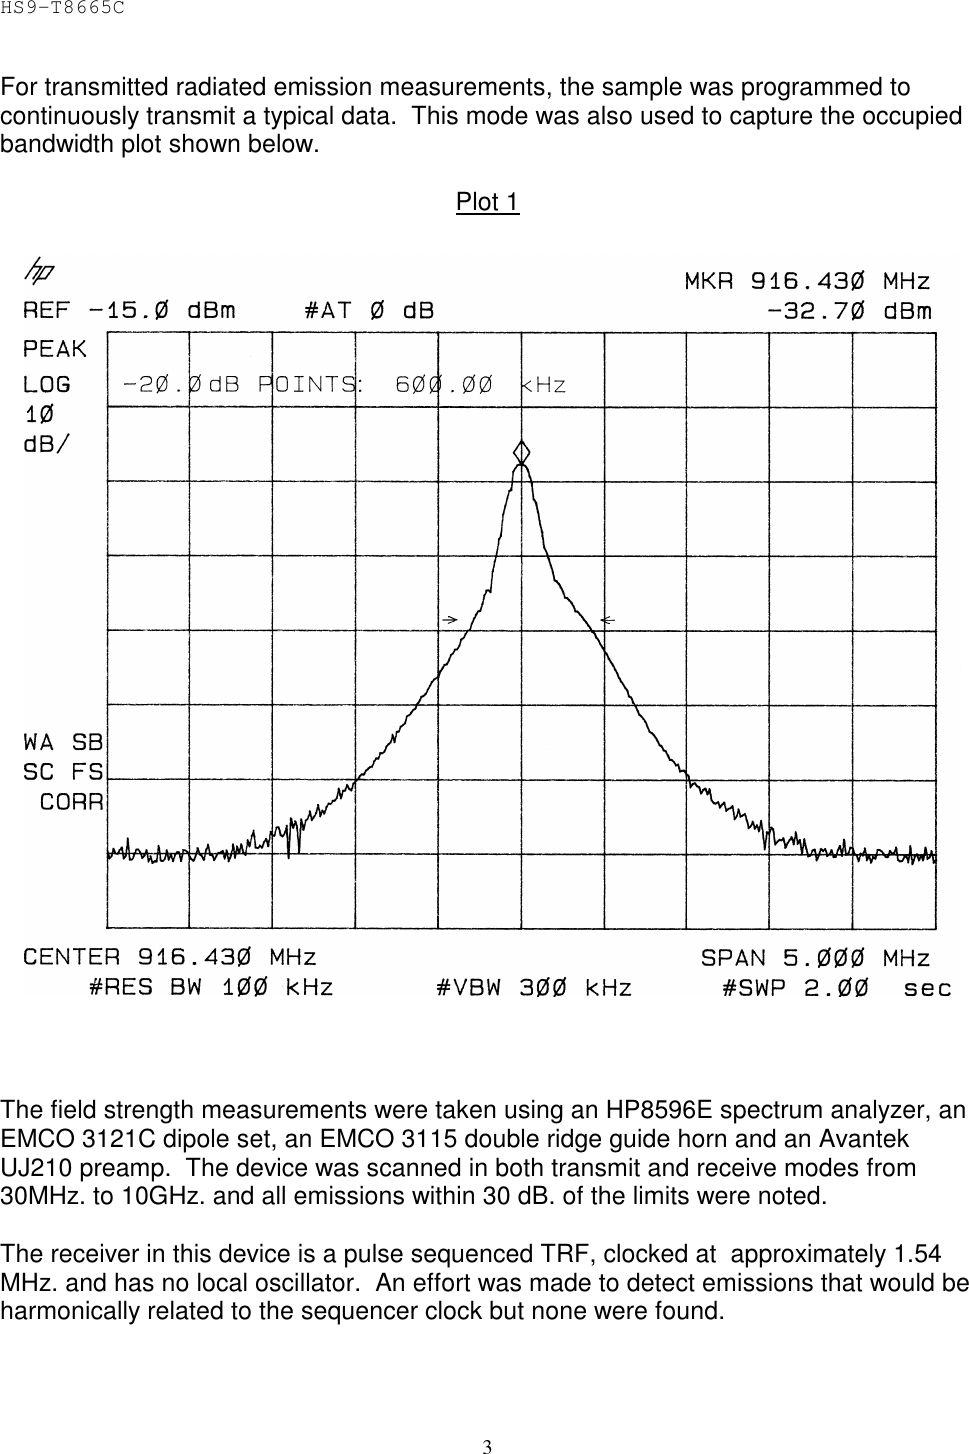 HS9-T8665C 3 For transmitted radiated emission measurements, the sample was programmed to continuously transmit a typical data.  This mode was also used to capture the occupied bandwidth plot shown below.   Plot 1      The field strength measurements were taken using an HP8596E spectrum analyzer, an EMCO 3121C dipole set, an EMCO 3115 double ridge guide horn and an Avantek UJ210 preamp.  The device was scanned in both transmit and receive modes from 30MHz. to 10GHz. and all emissions within 30 dB. of the limits were noted.  The receiver in this device is a pulse sequenced TRF, clocked at  approximately 1.54 MHz. and has no local oscillator.  An effort was made to detect emissions that would be harmonically related to the sequencer clock but none were found. 